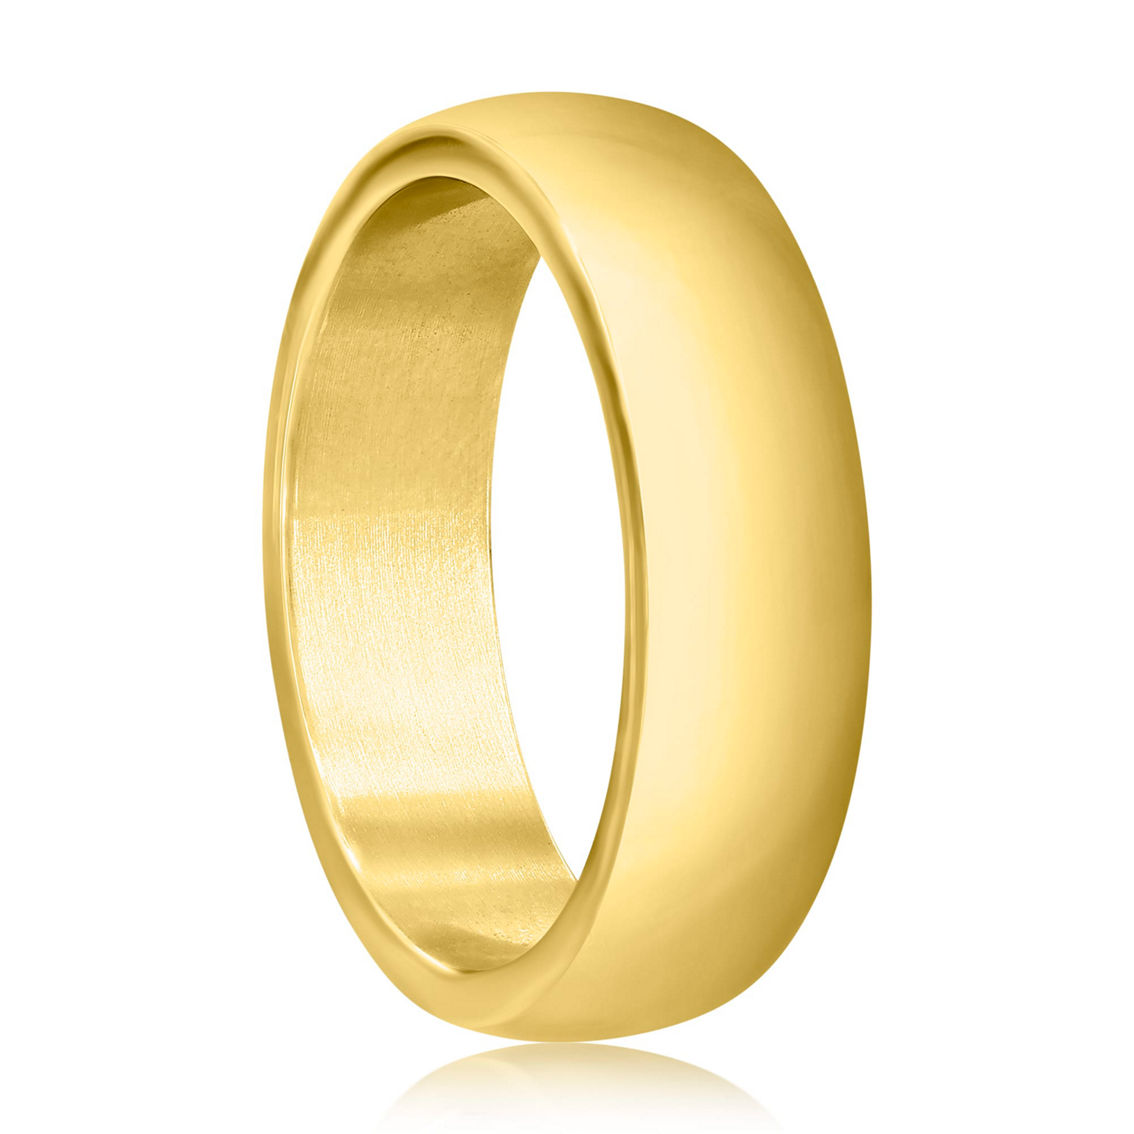 Metallo Stainless Steel 6mm Polished Ring - Gold Plated - Image 2 of 3